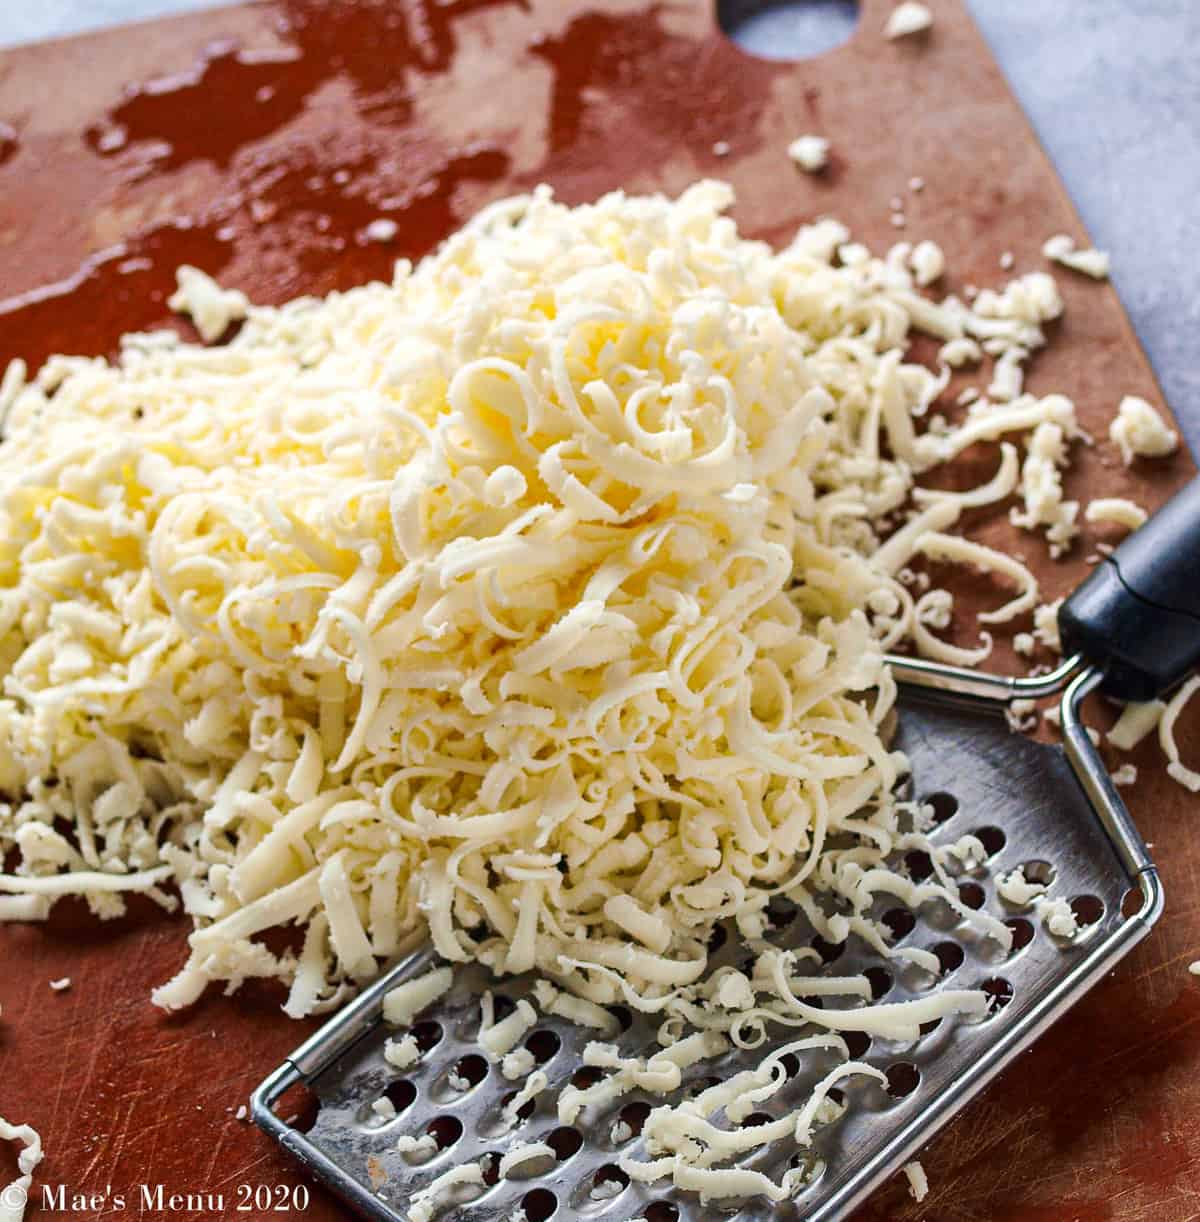 A wooden cutting board with shredded mozzarella cheese and a grater